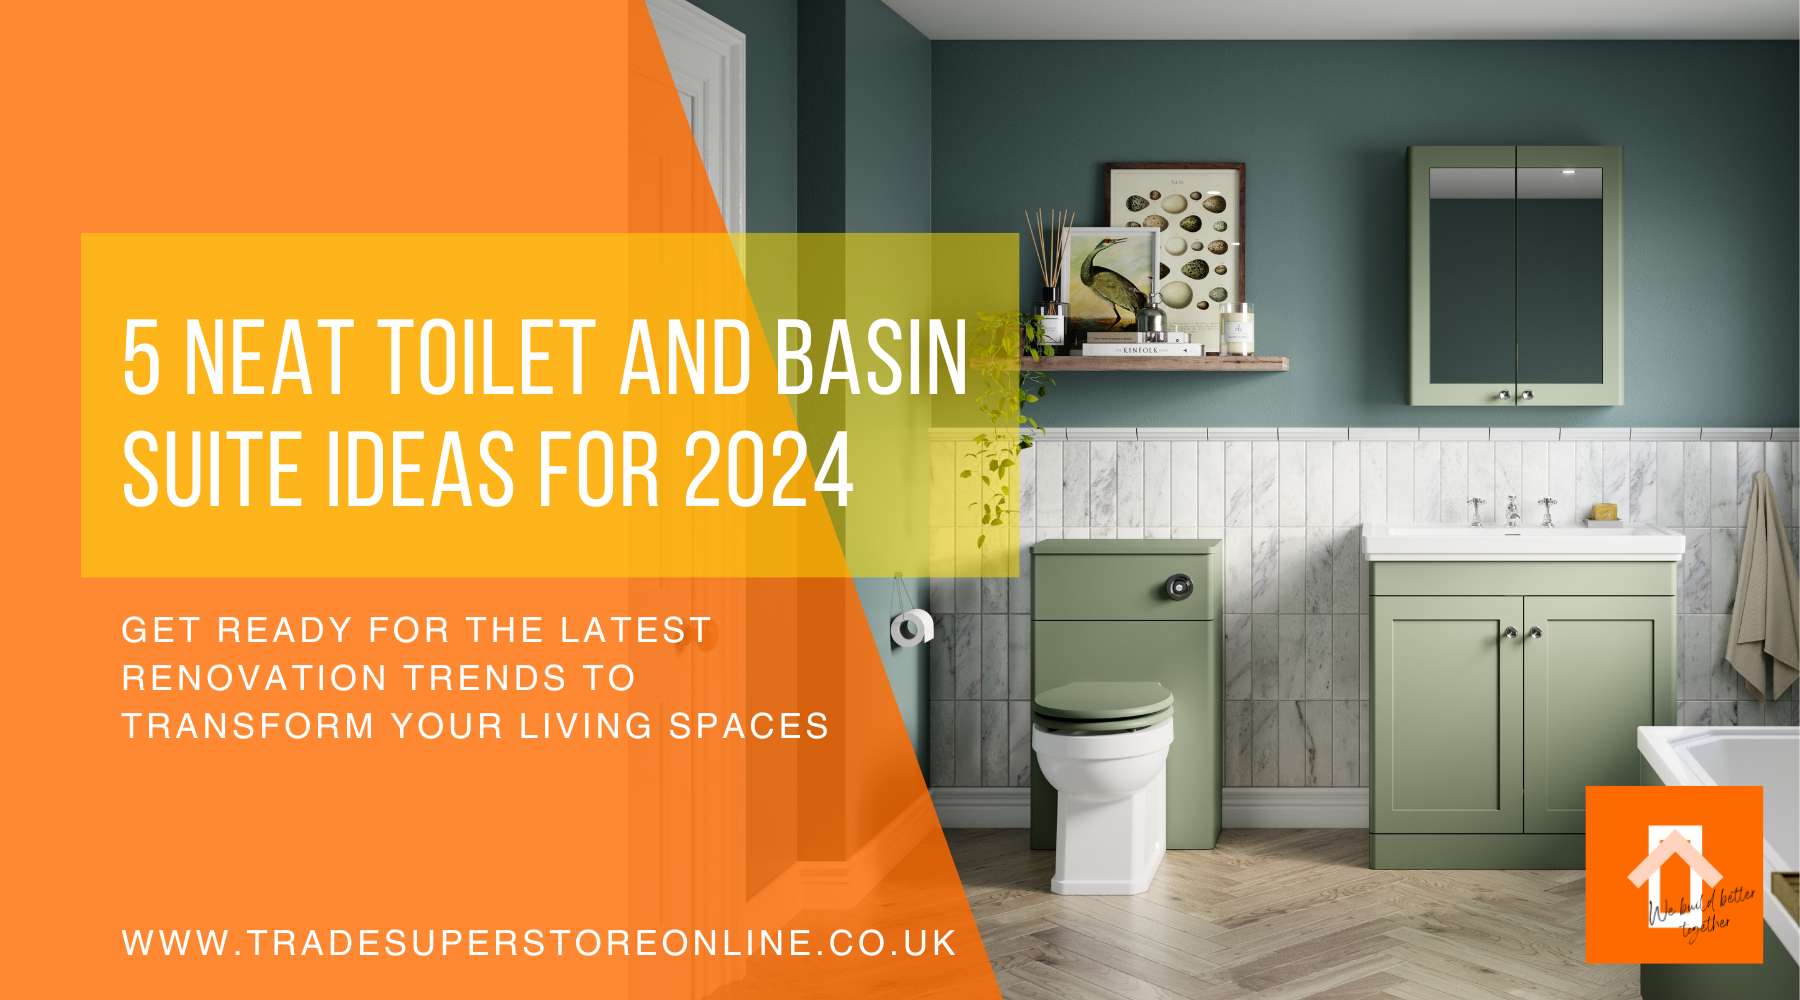 5 Neat Toilet and Basin Suite Ideas for 2024: Elevate Your Bathroom Design